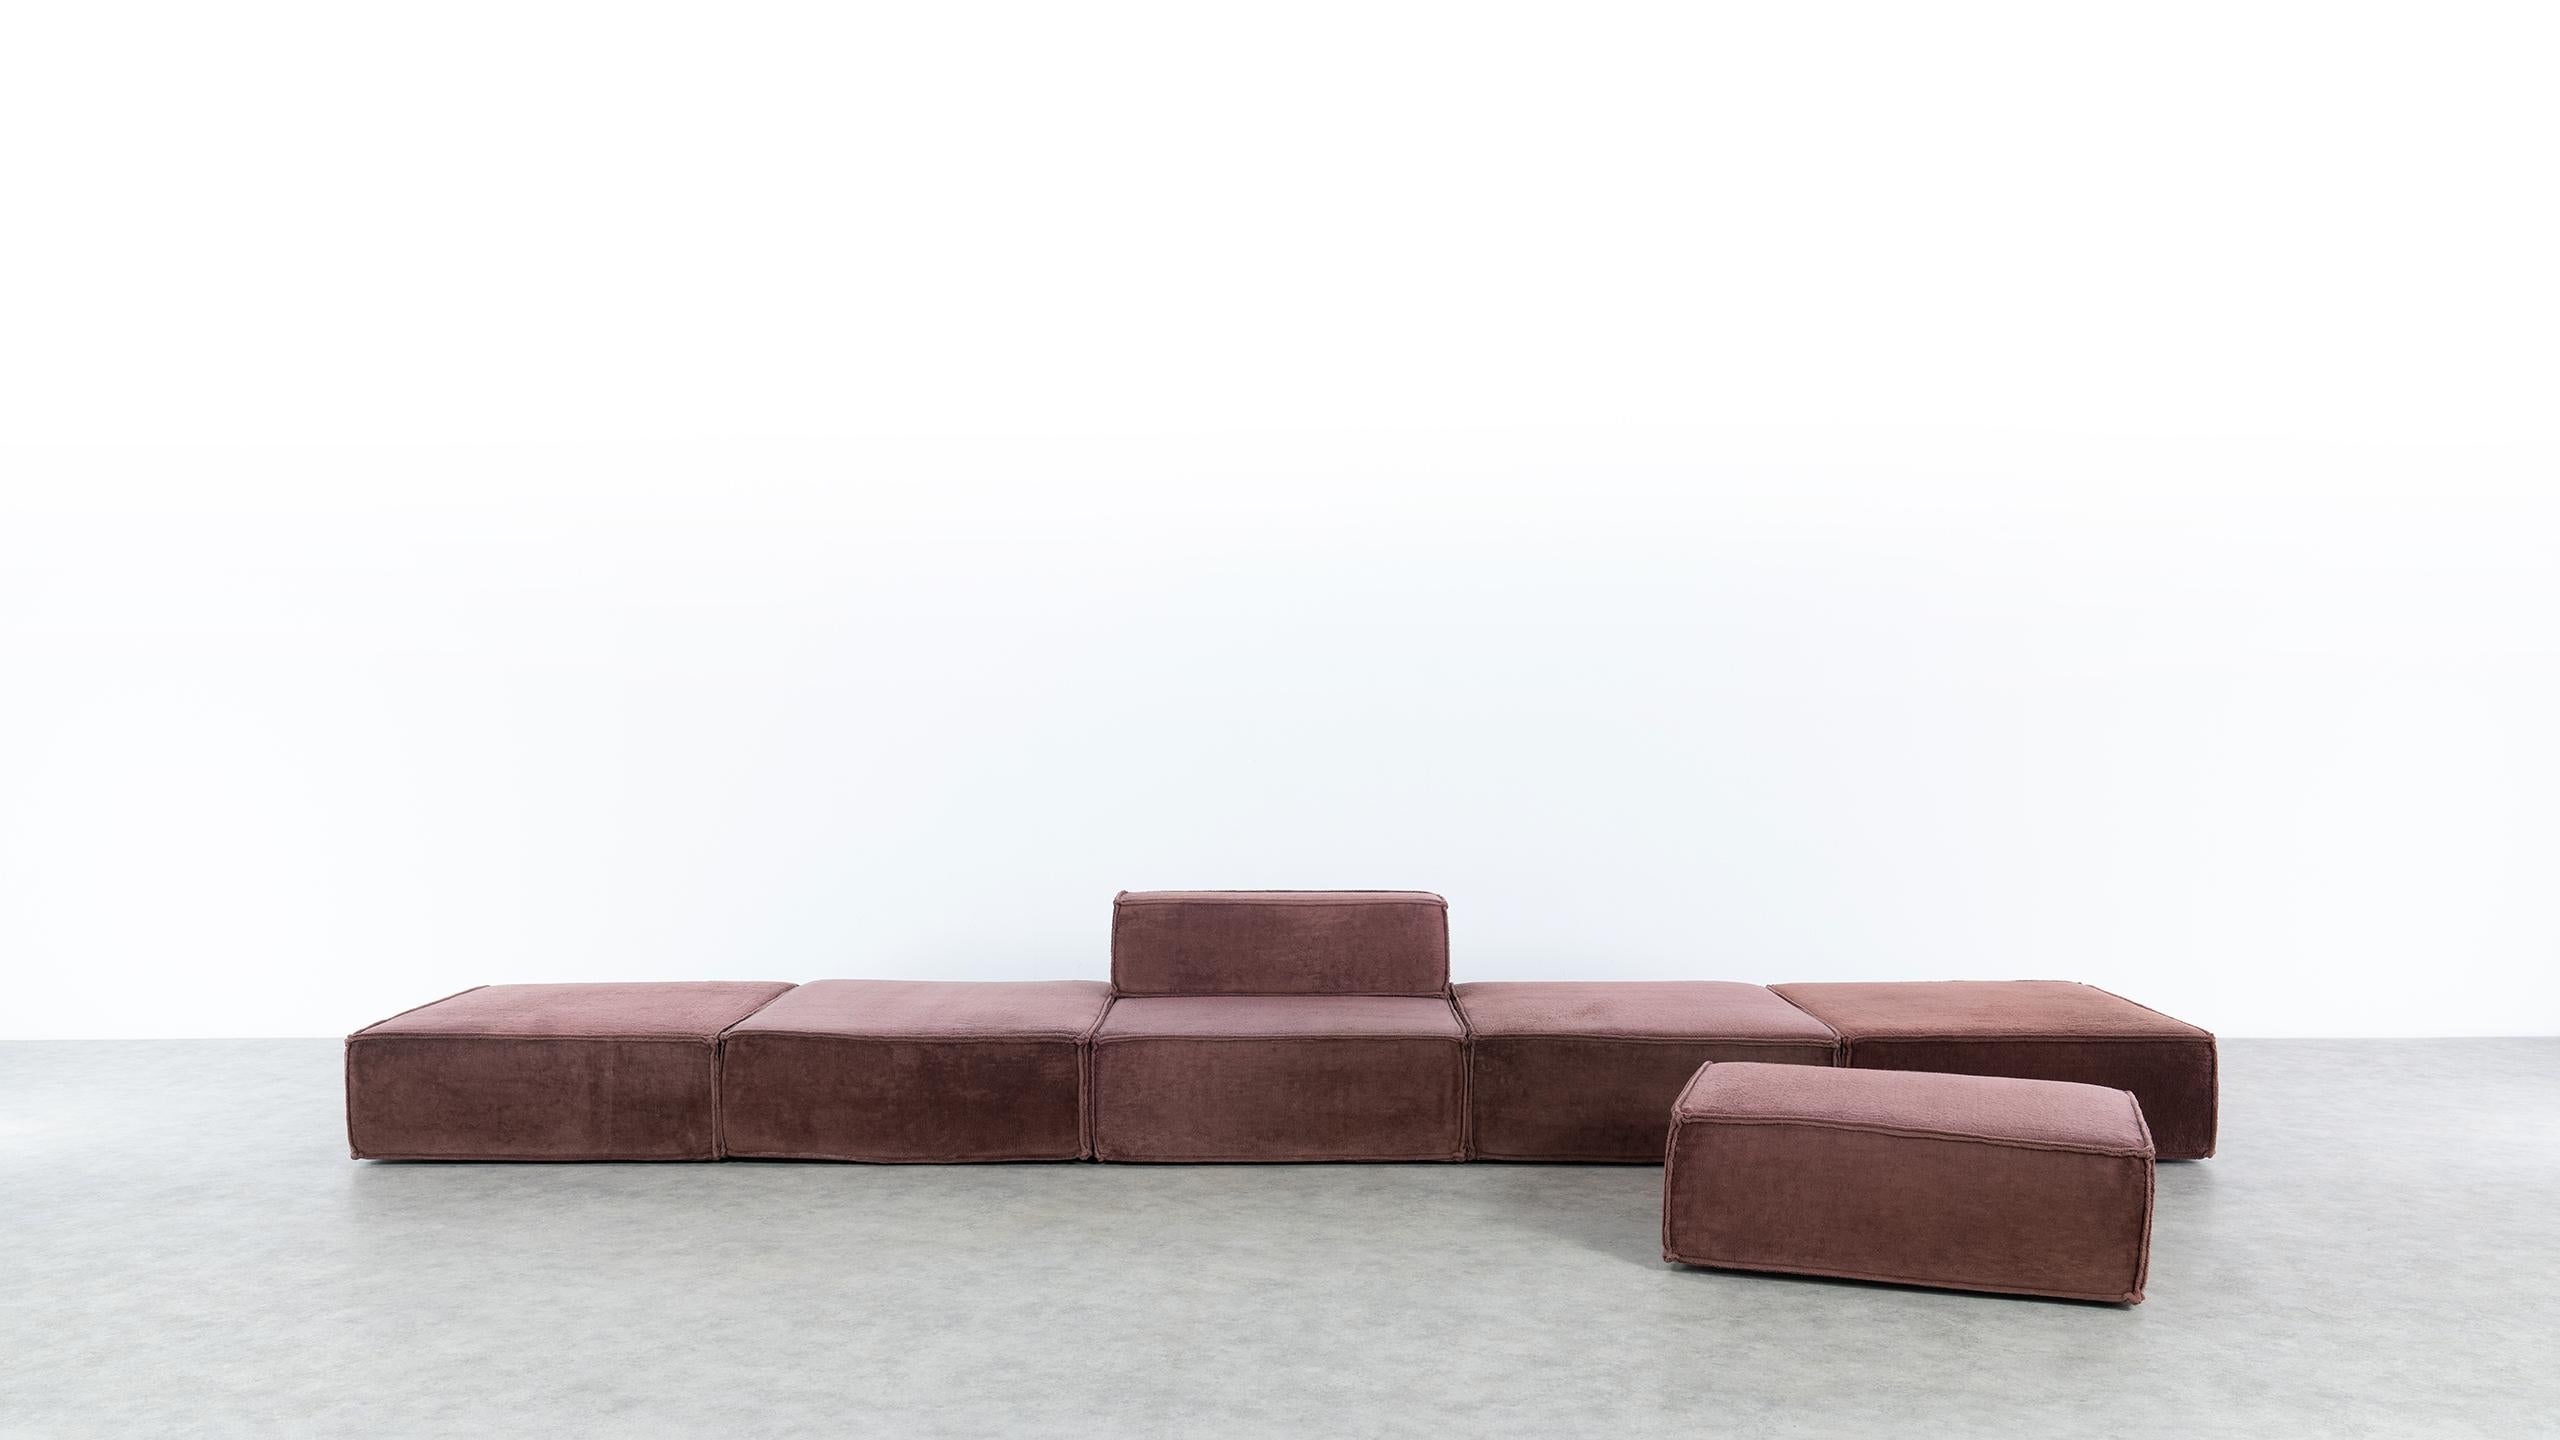 COR Trio Modular Sofa, Giant Landscape in Brown, 1972 by Team Form AG, Swiss 1